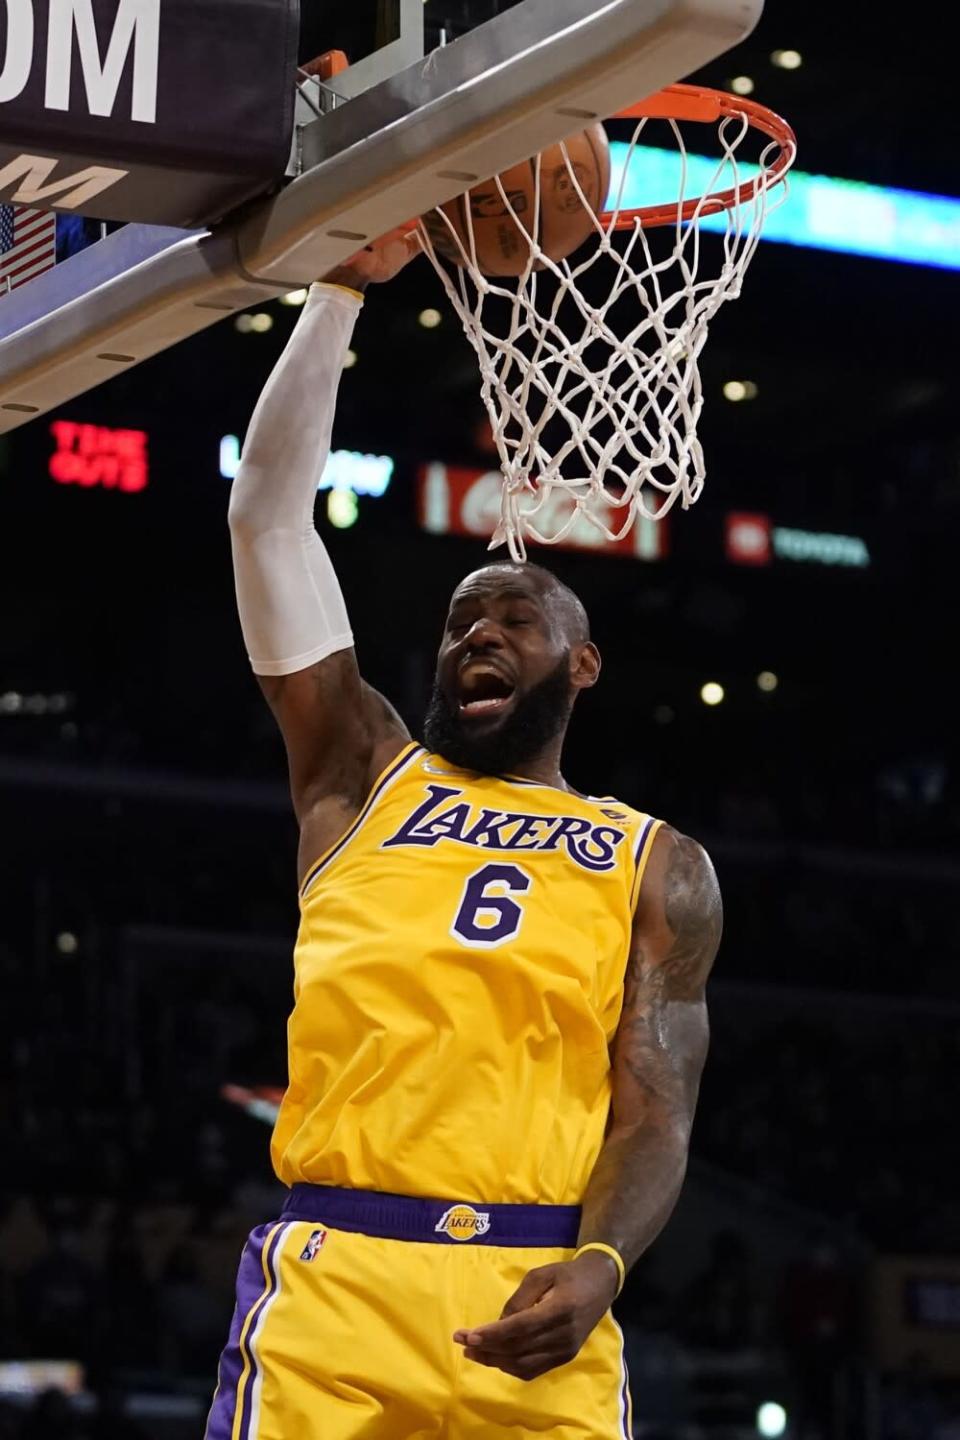 The Lakers' LeBron James dunks during the first half against the Golden State Warriors on March 5, 2022.